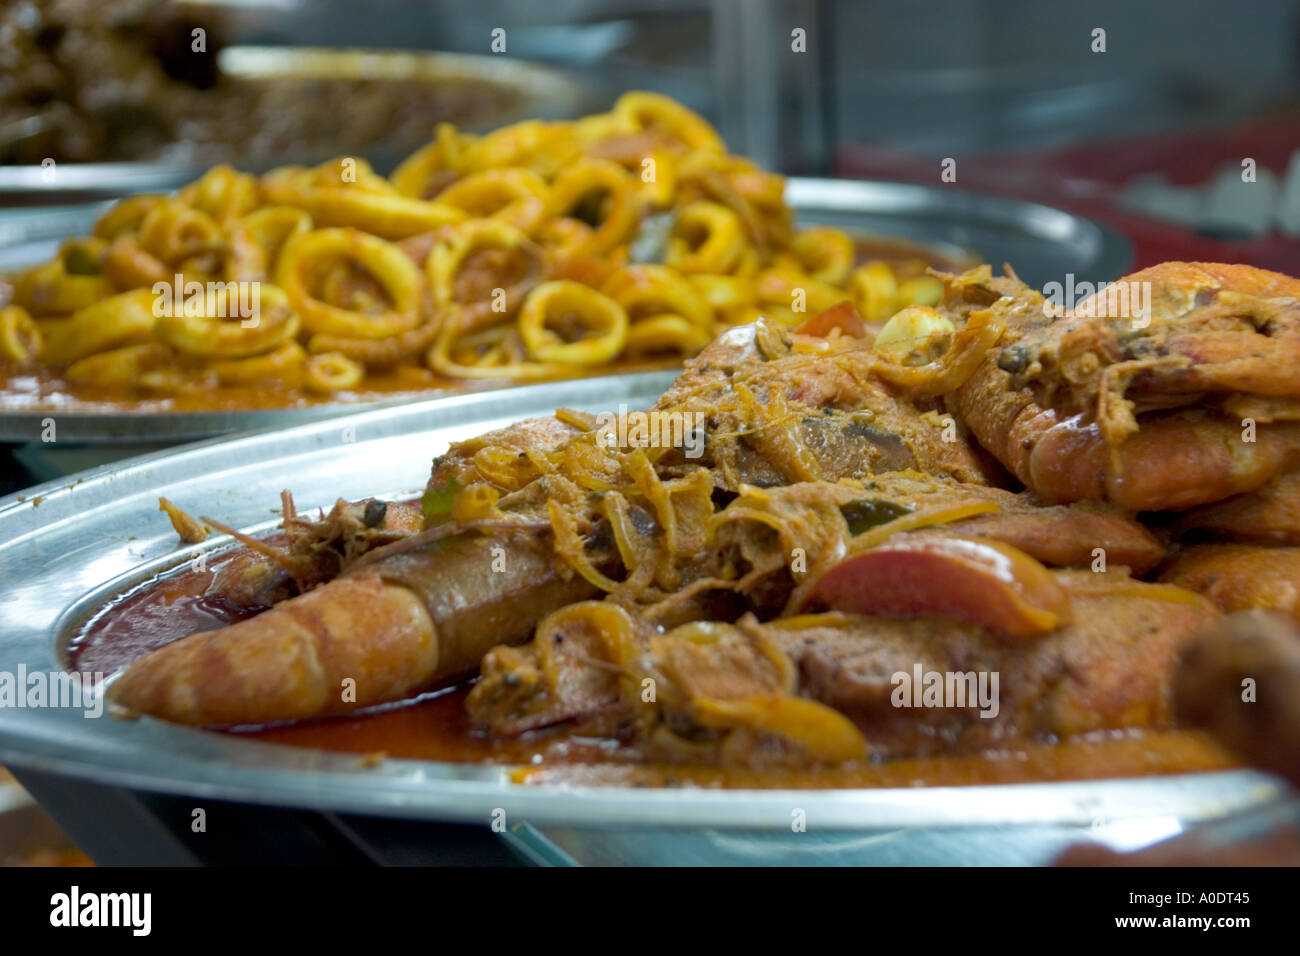 Curried prawns in an Indian restaurant in Singapore Stock Photo